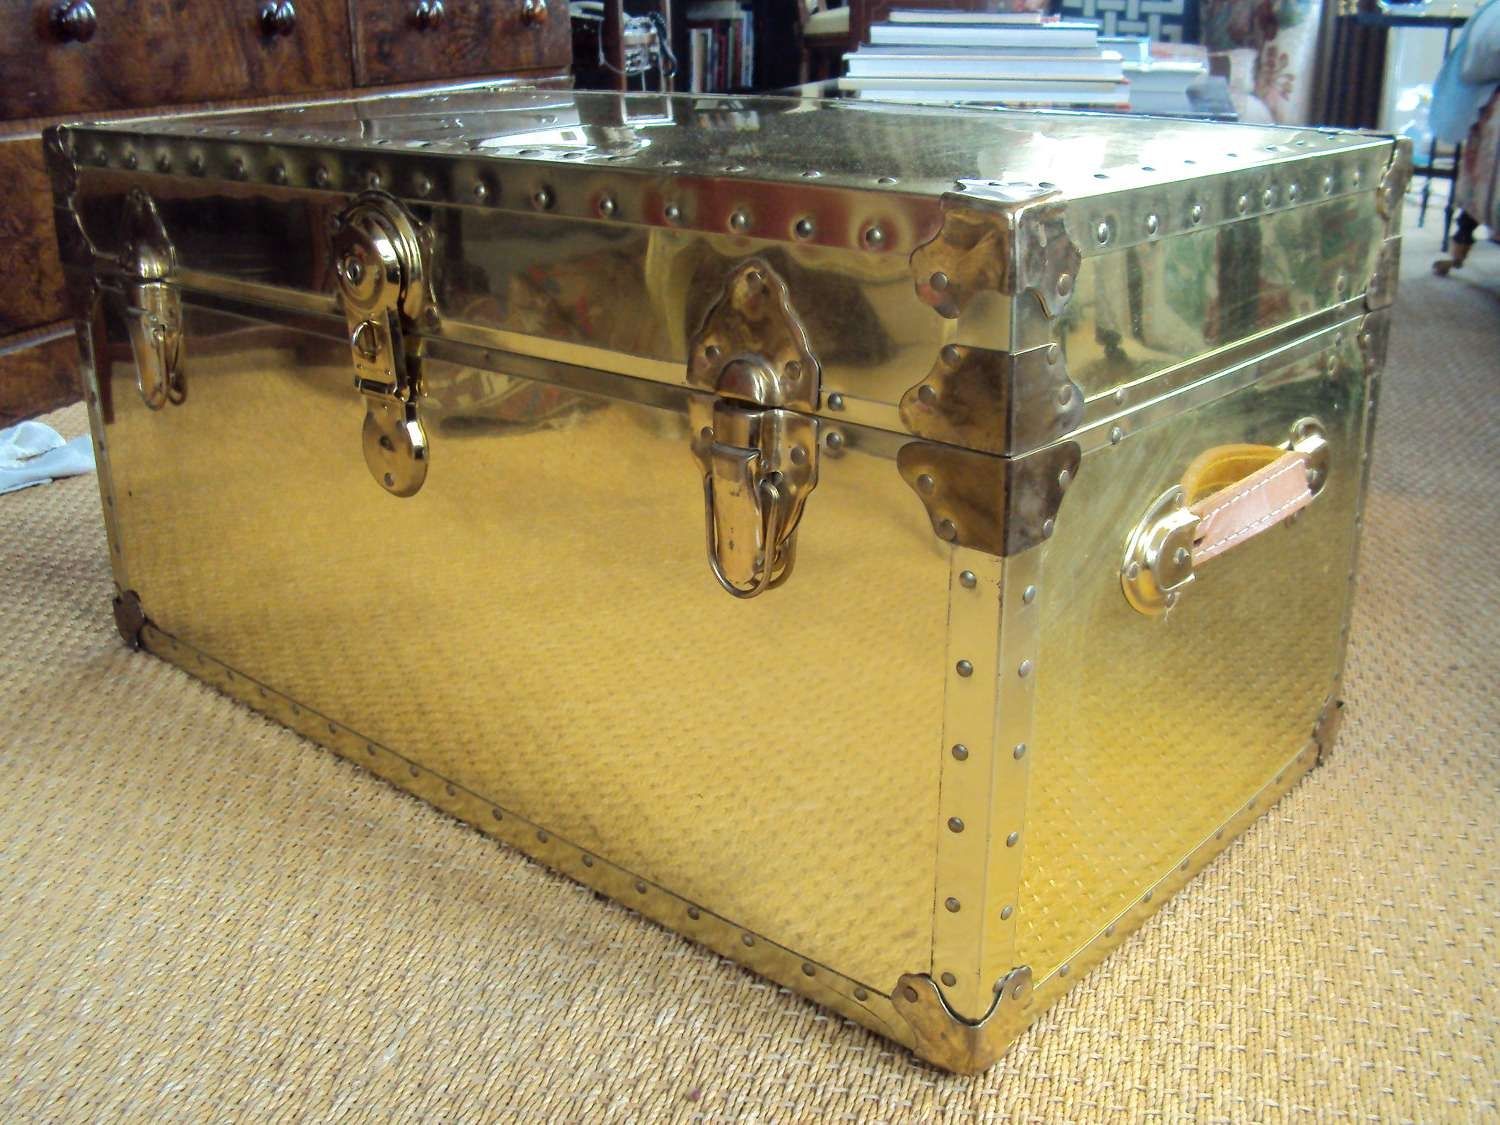 Well Known Stainless Steel Trunk Coffee Tables With Appearance Details For Steamer Trunk Coffee Table ~ Home Decorations (Gallery 20 of 20)